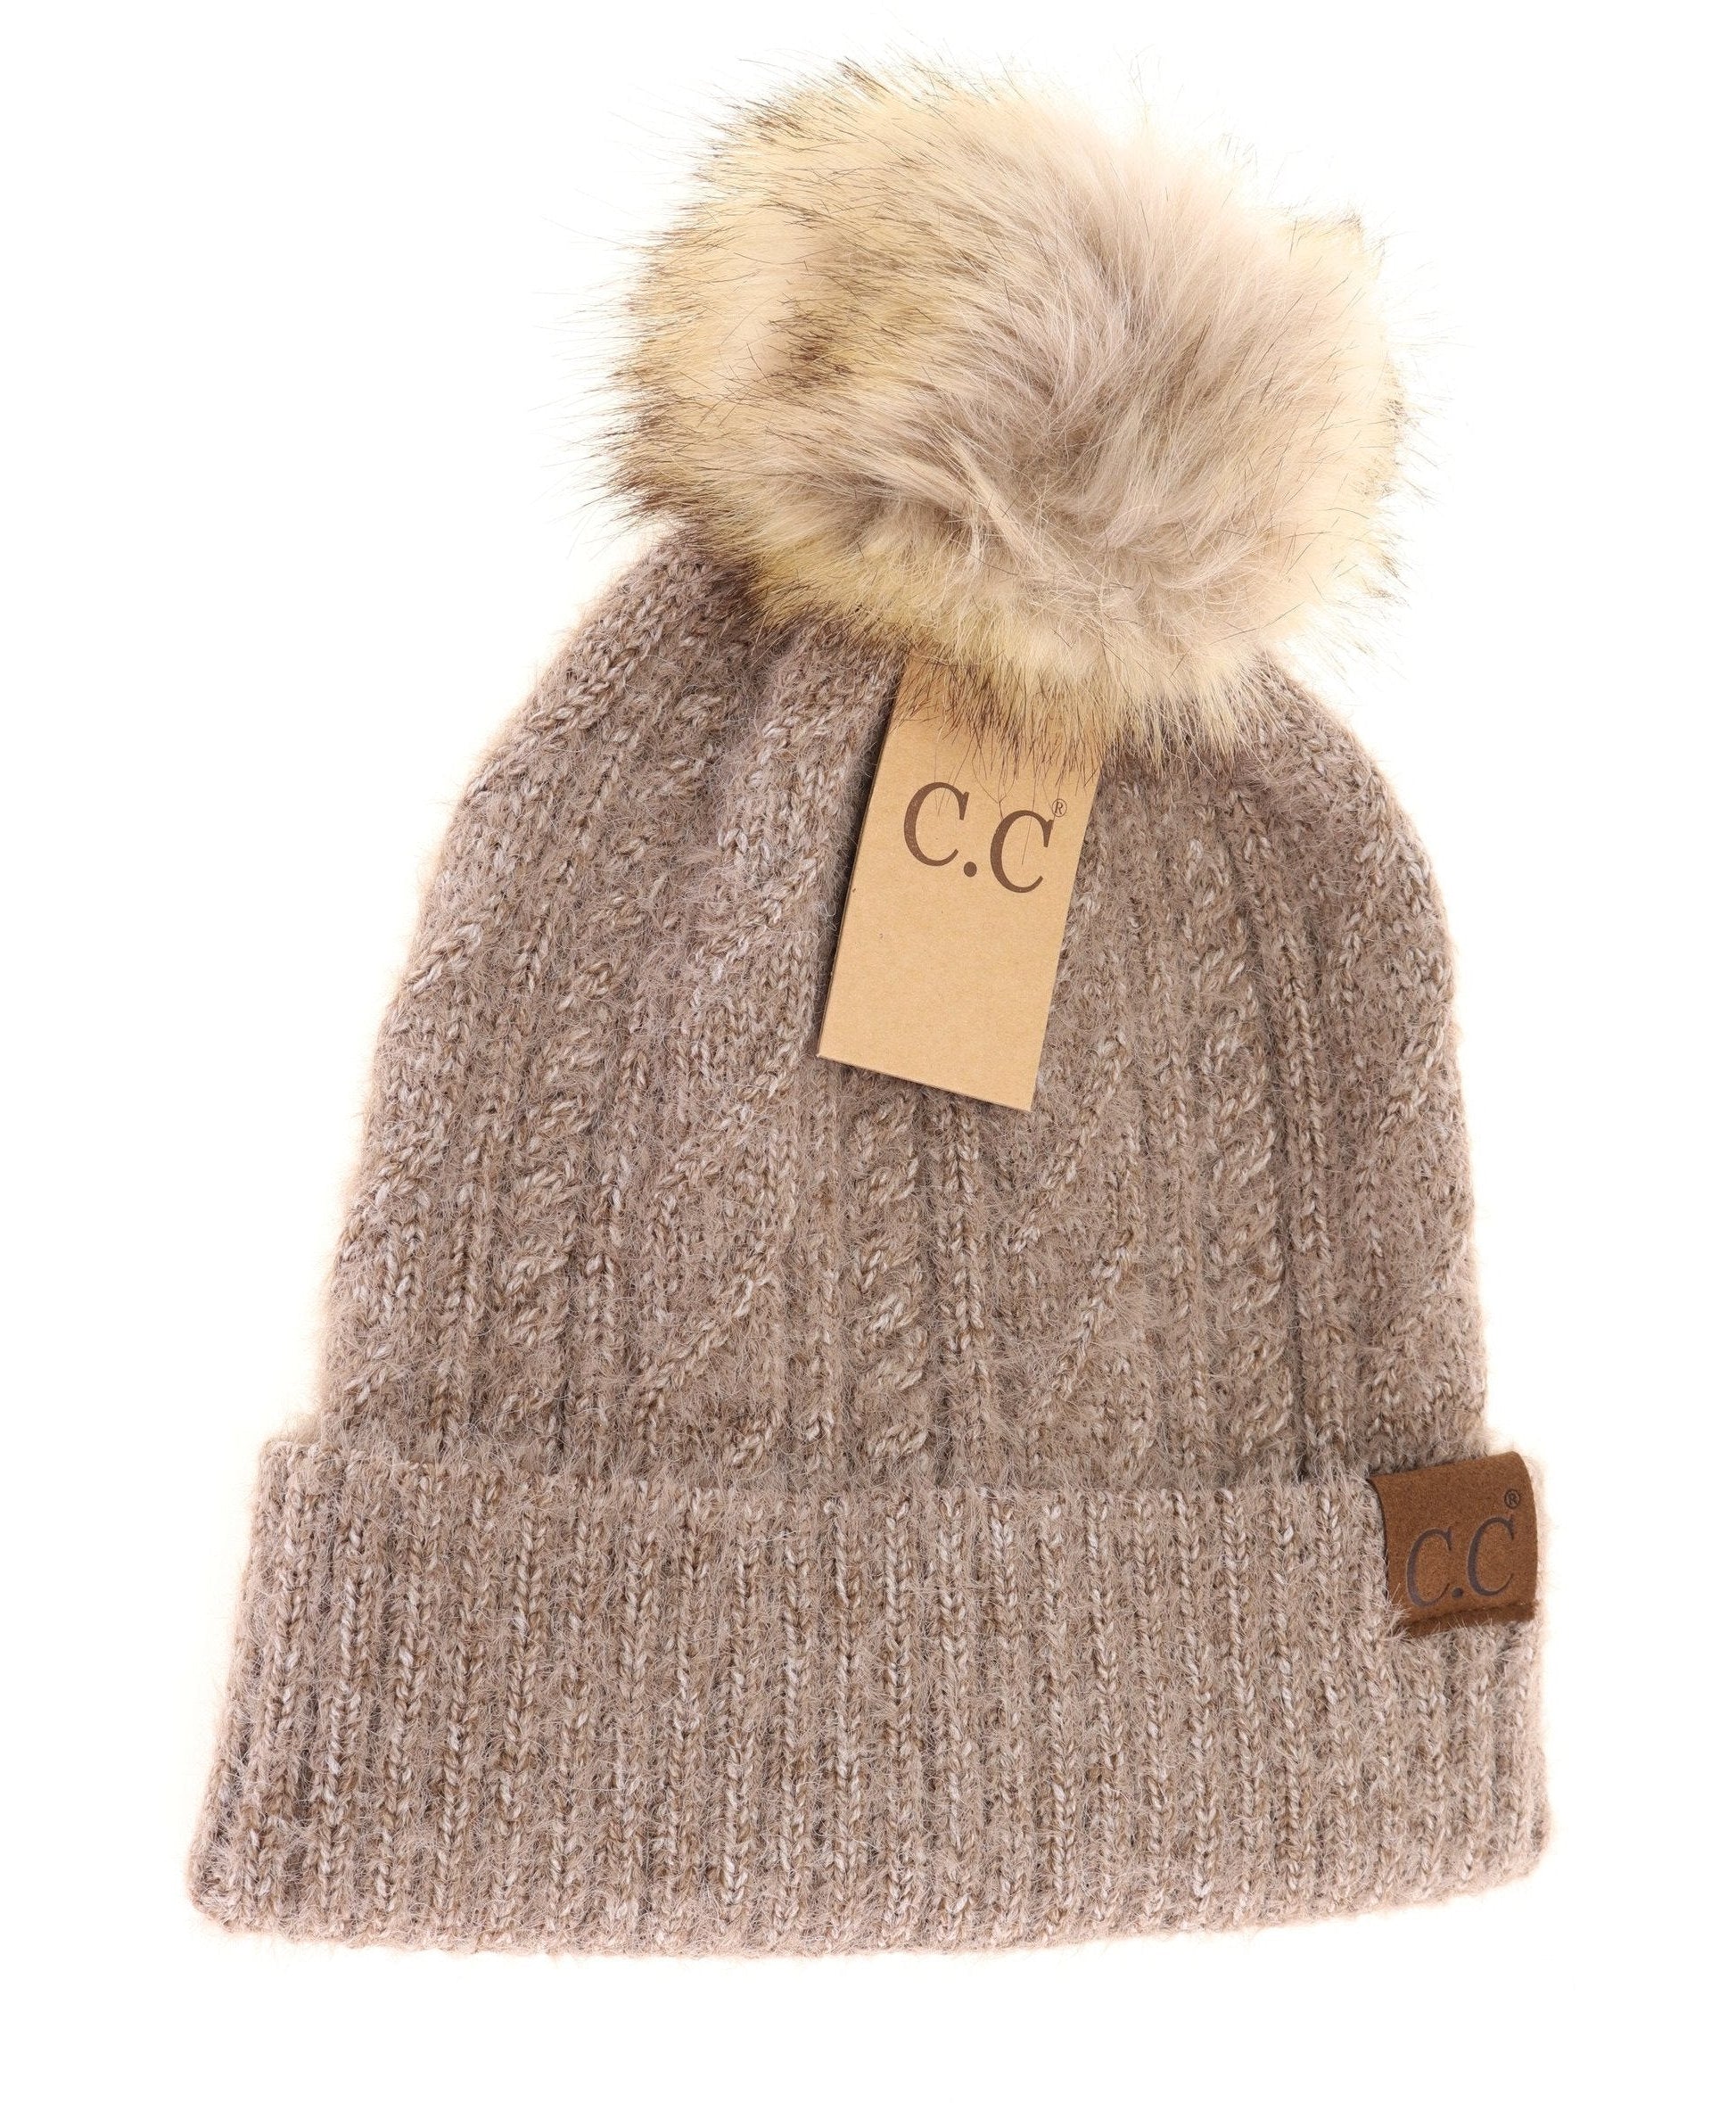 Soft Cuff Cable Knit Fur Pom C.C Beanie Taupe Taupe  beanie CC Brand Beanies- Tilden Co.